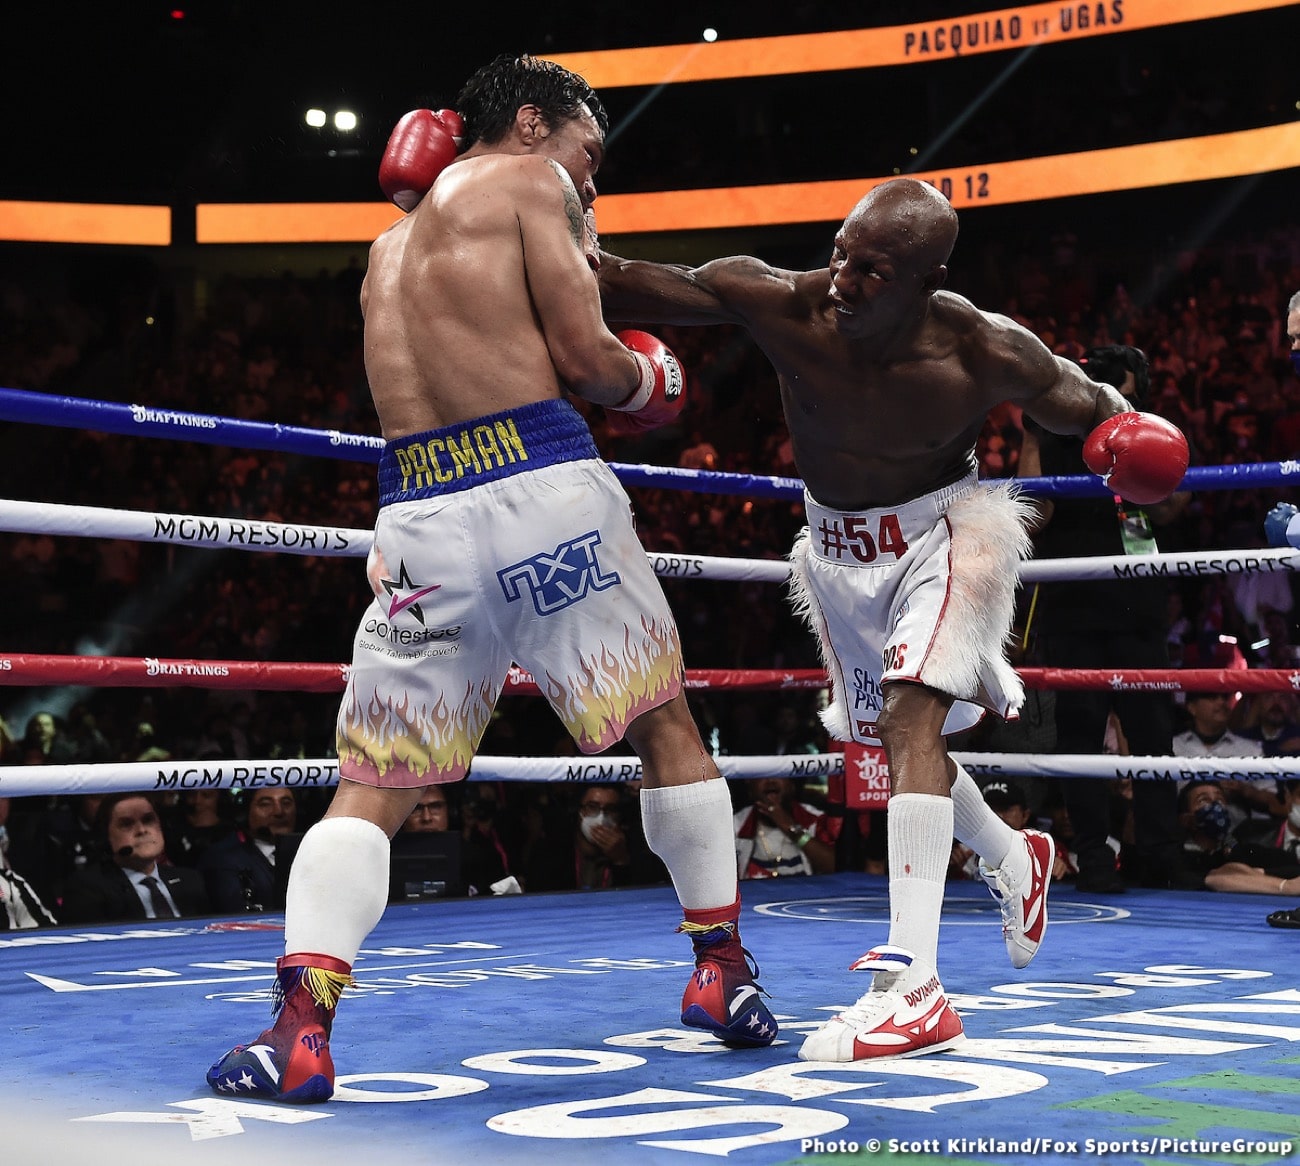 Image: Yordenis Ugas: I'll be better prepared for Pacquiao rematch